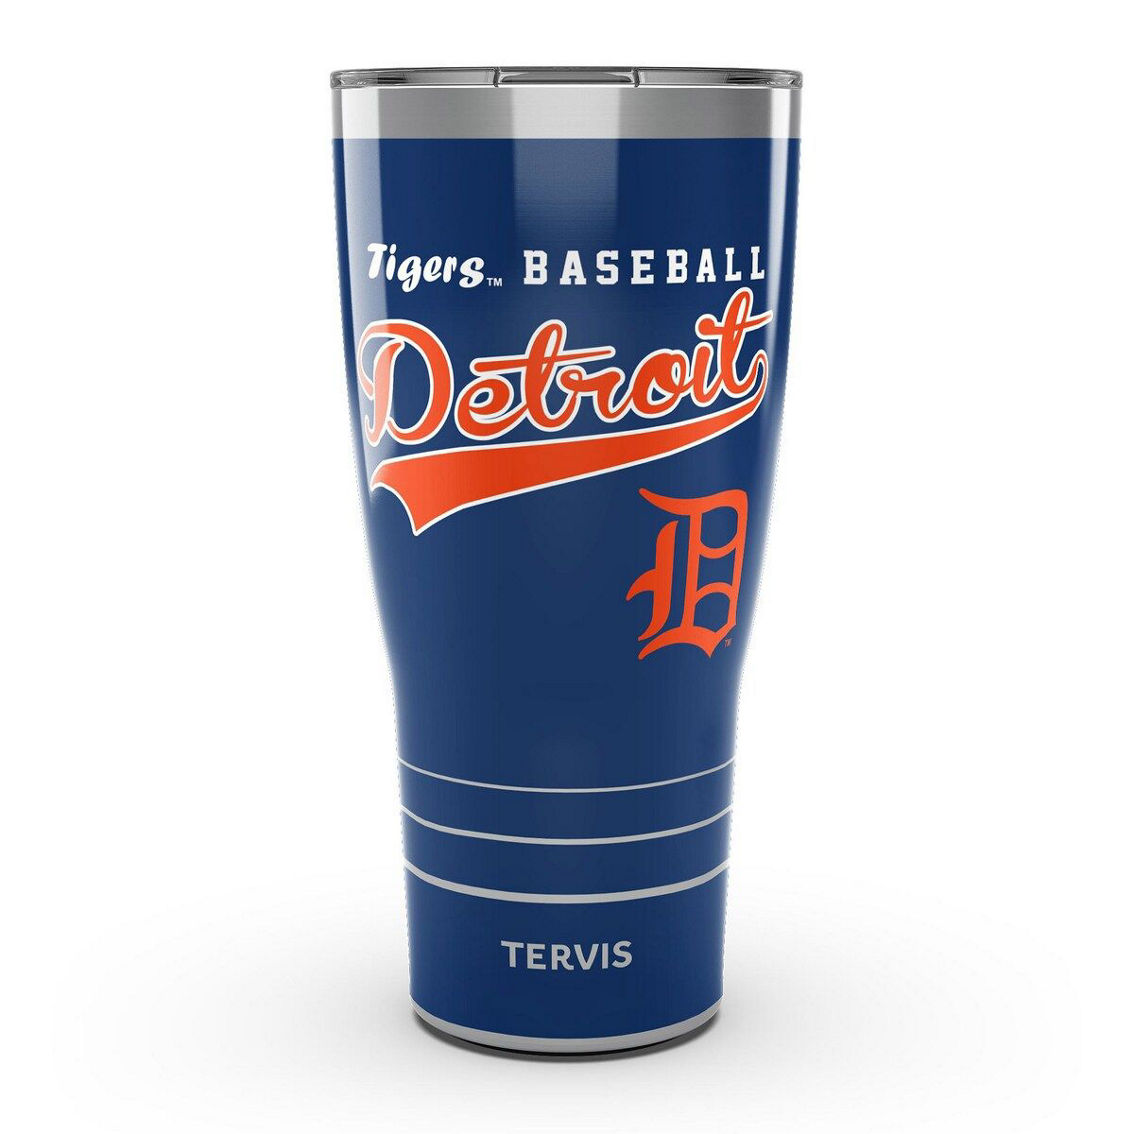 Tervis Detroit Tigers 30oz. Vintage Stainless Steel Tumbler - Image 2 of 2